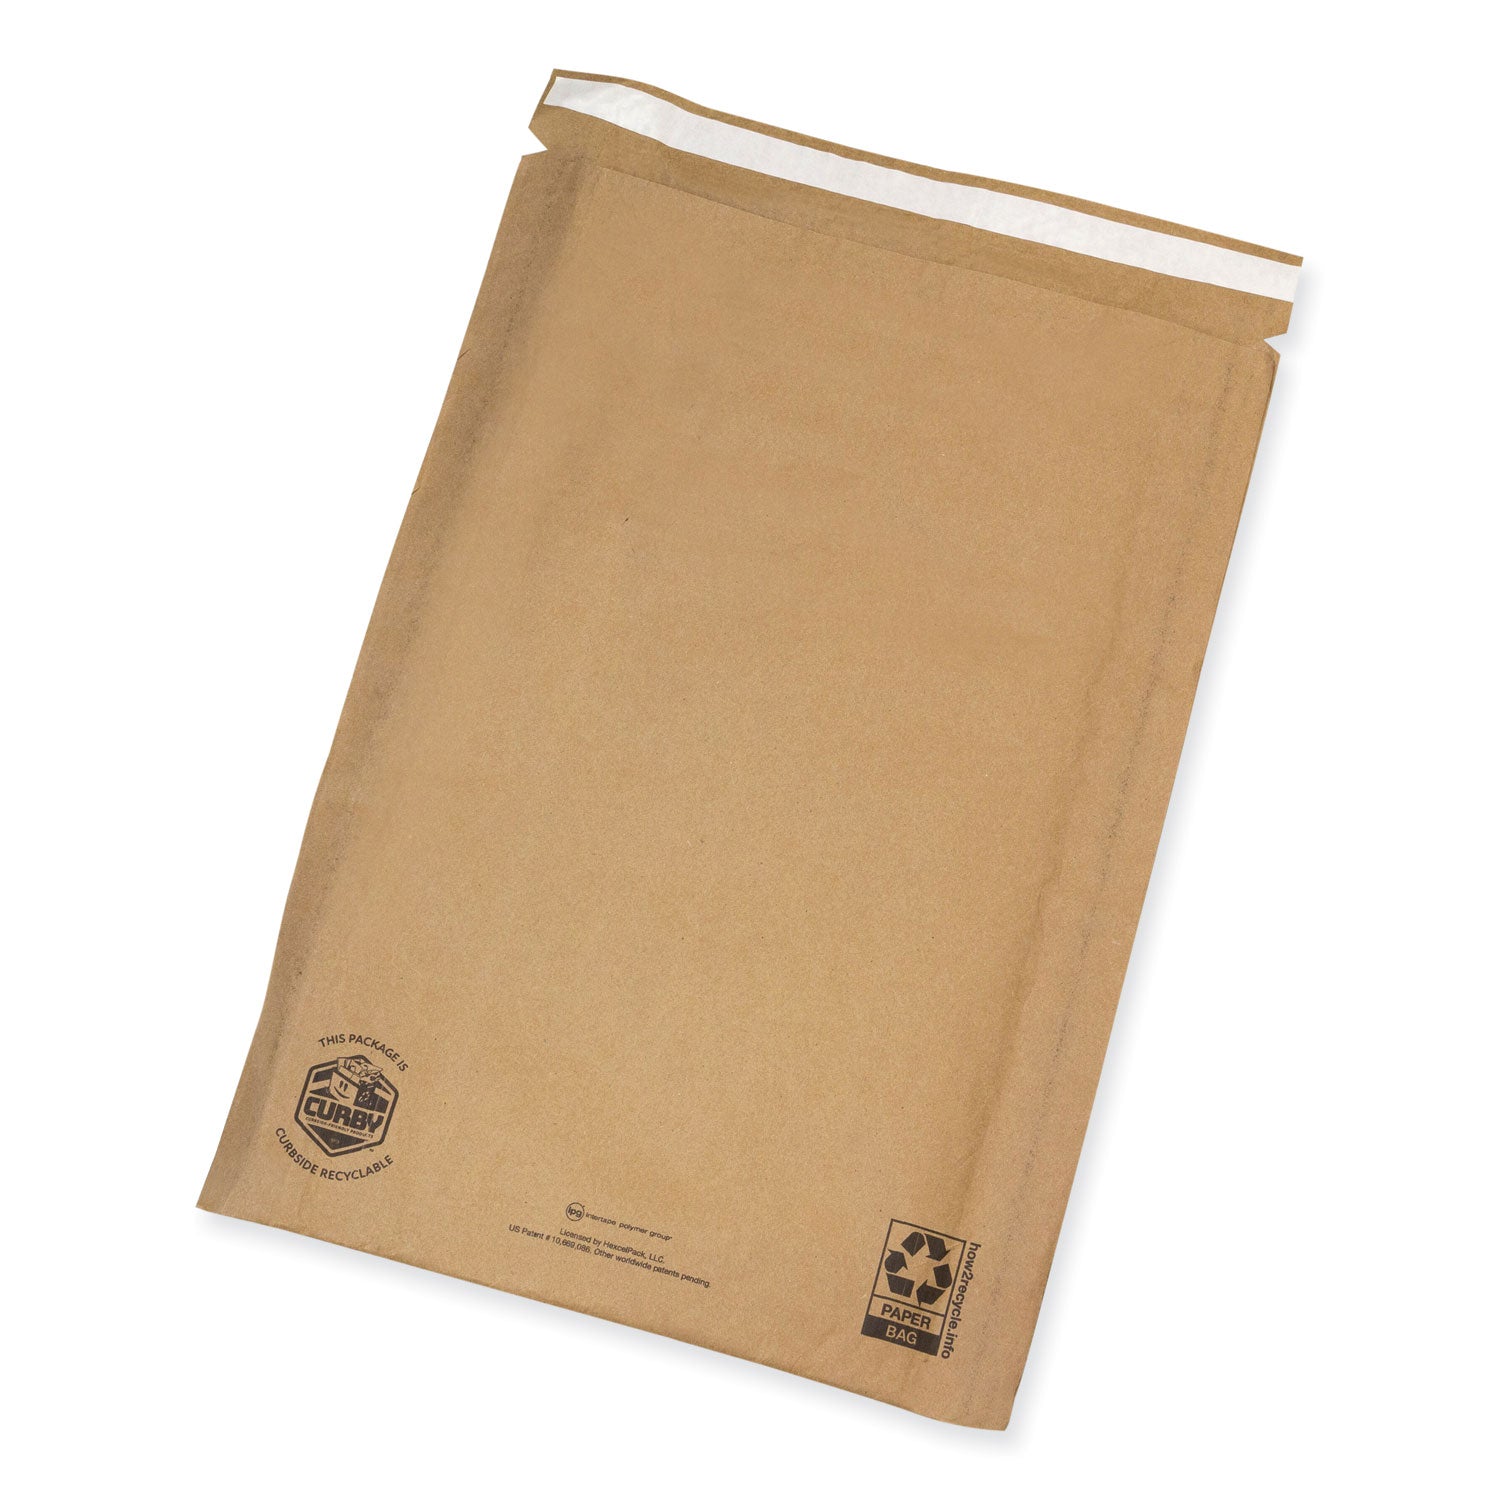 curby-mailer-self-sealing-recyclable-mailer-paper-padding-self-adhesive-#6-1338-x-185-30-carton_ipgcbml6c - 1